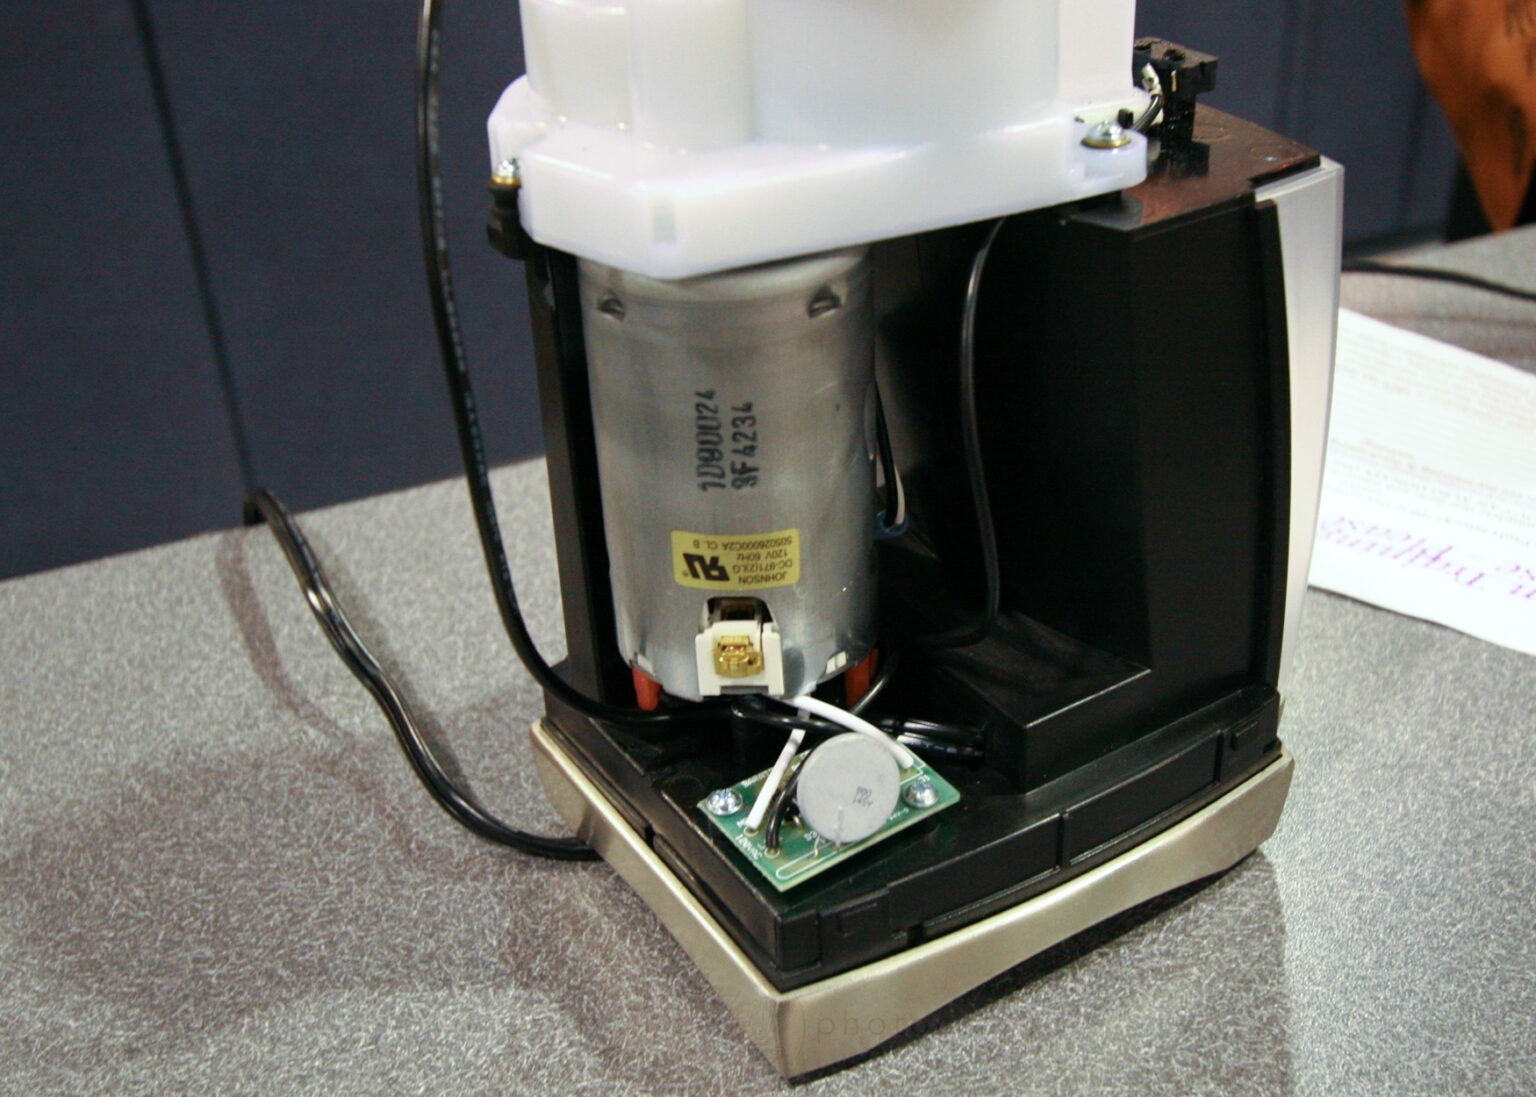 Here's the original prototype Virtuoso with its then-new and unique DC motor. This photo is from the 2006 SCAA show.